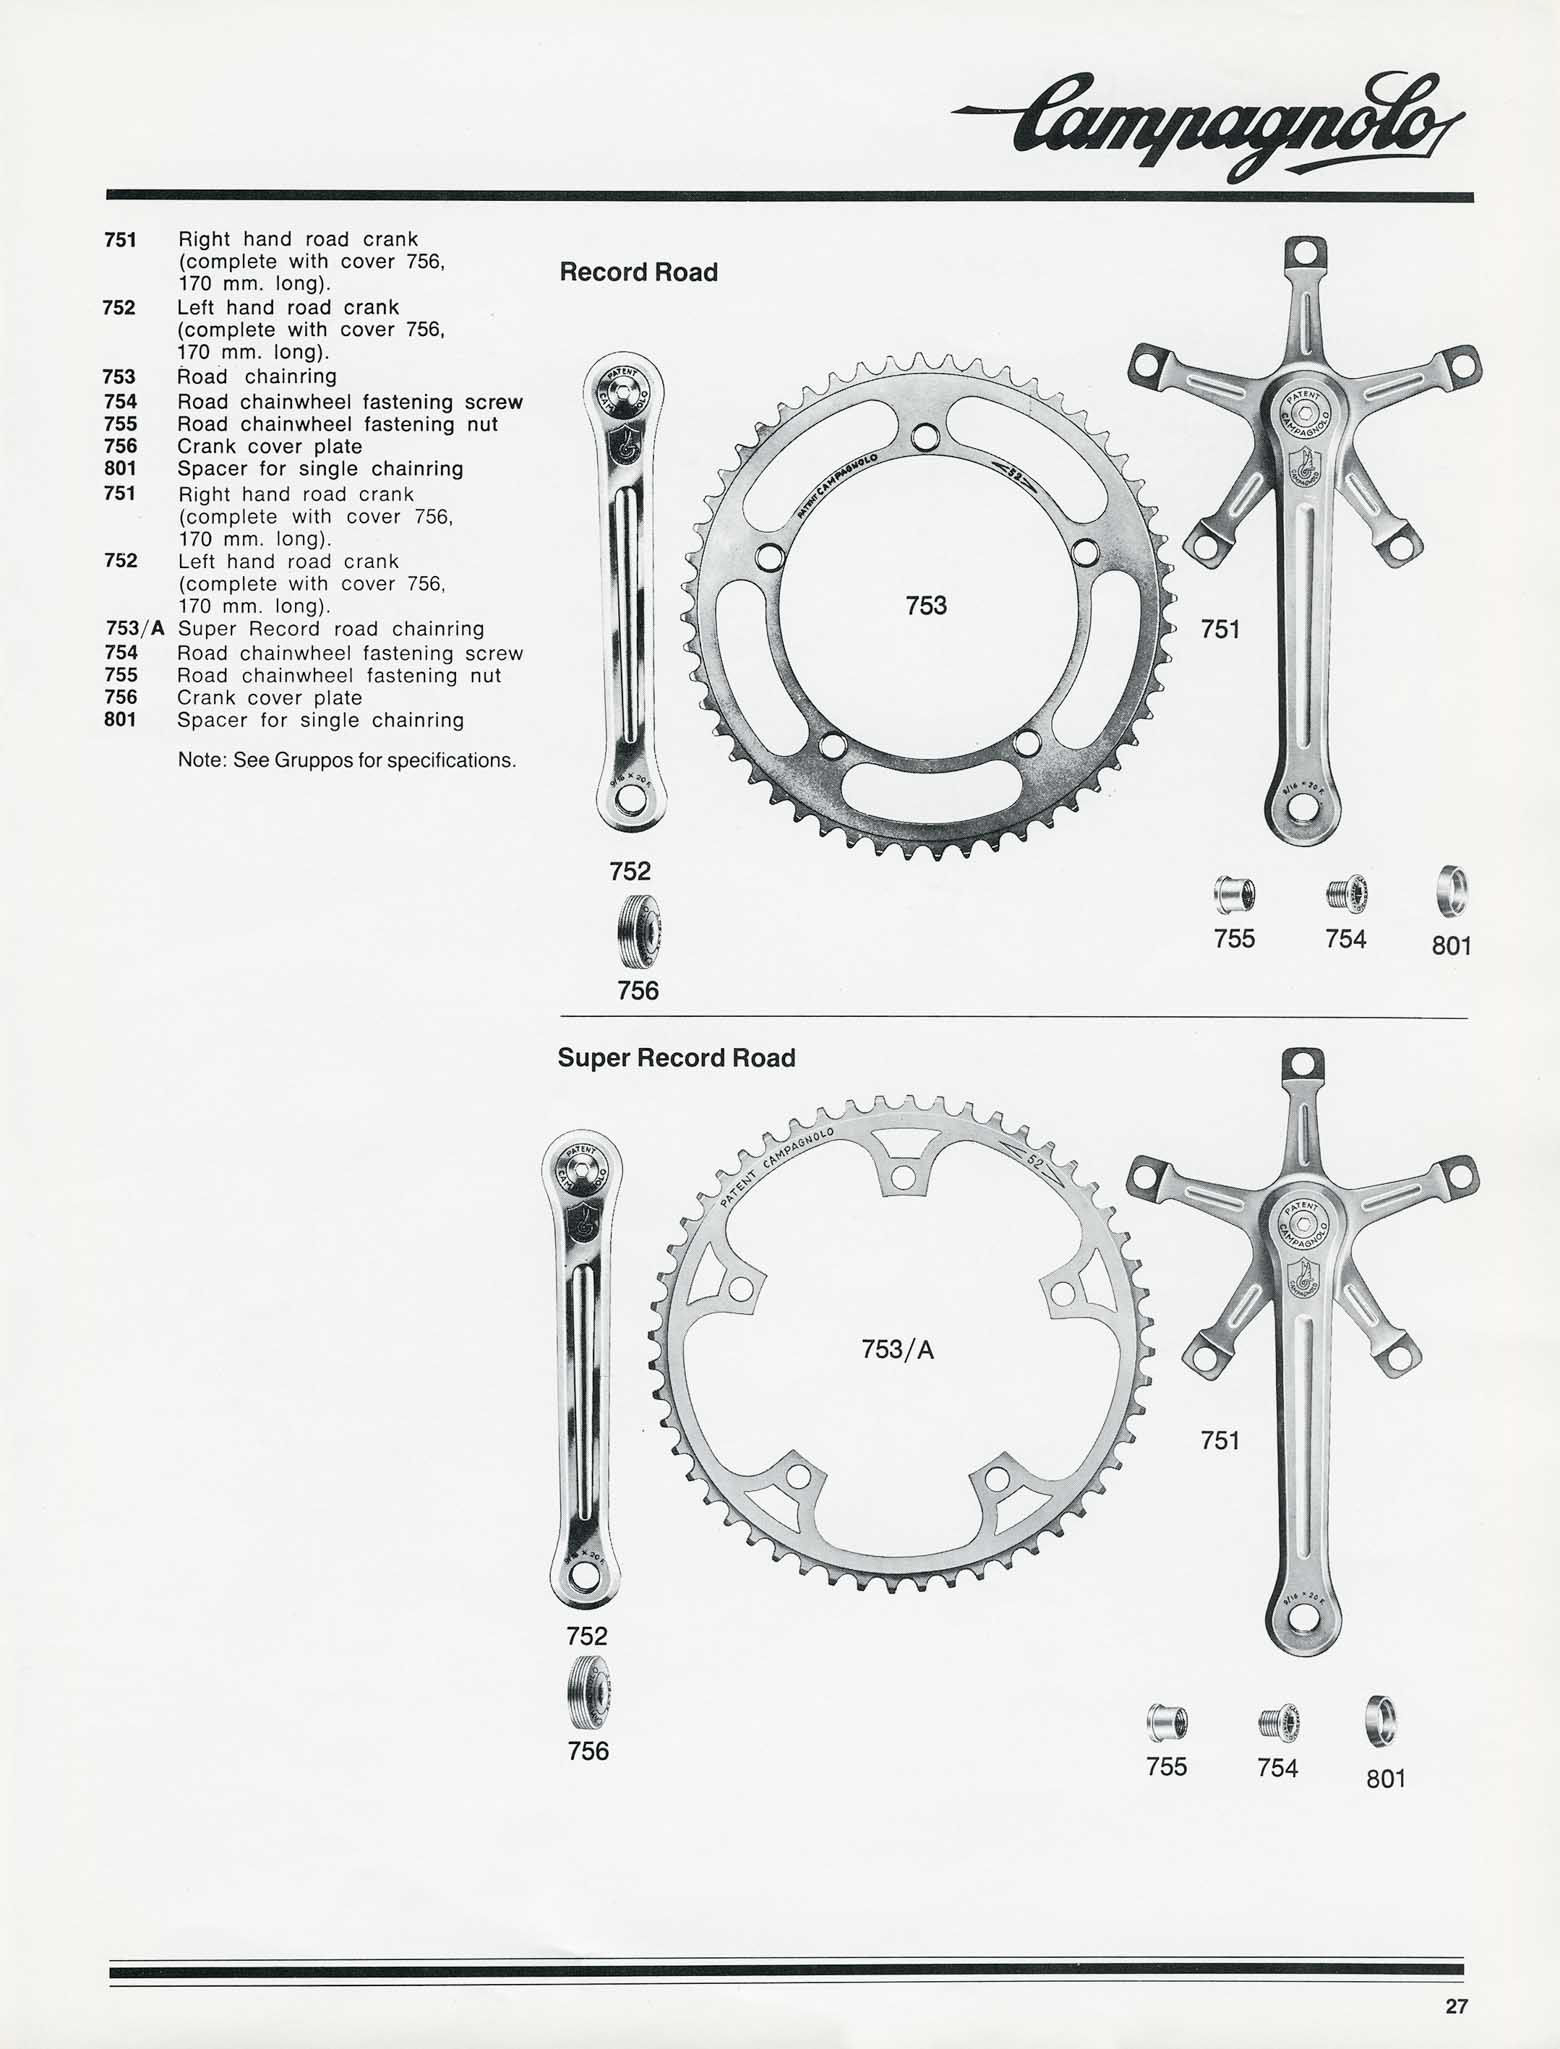 Campagnolo - Bicycle Components 1982 page 27 main image